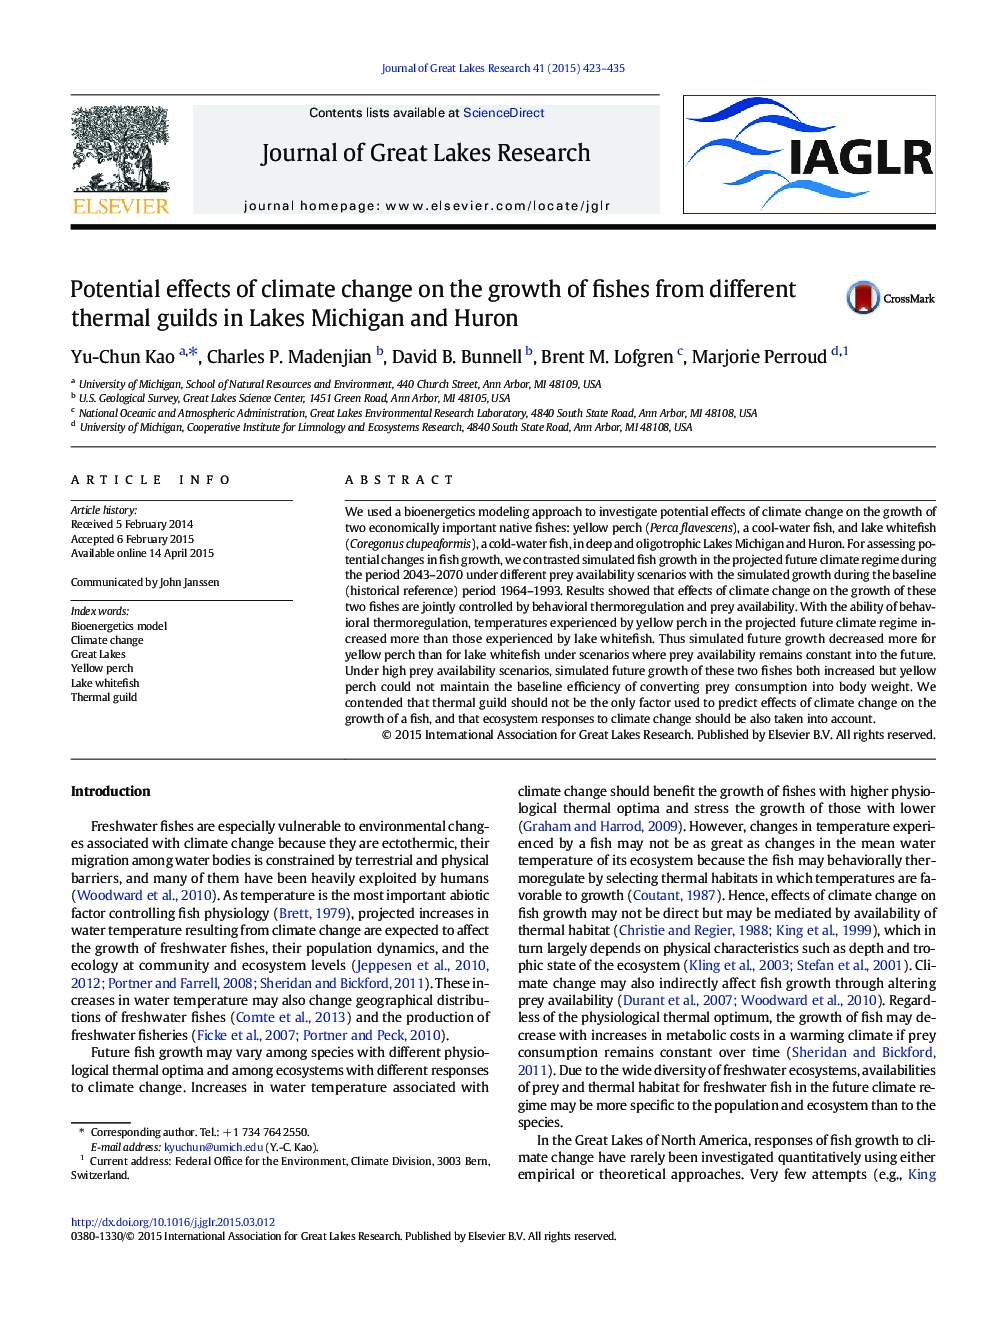 Potential effects of climate change on the growth of fishes from different thermal guilds in Lakes Michigan and Huron